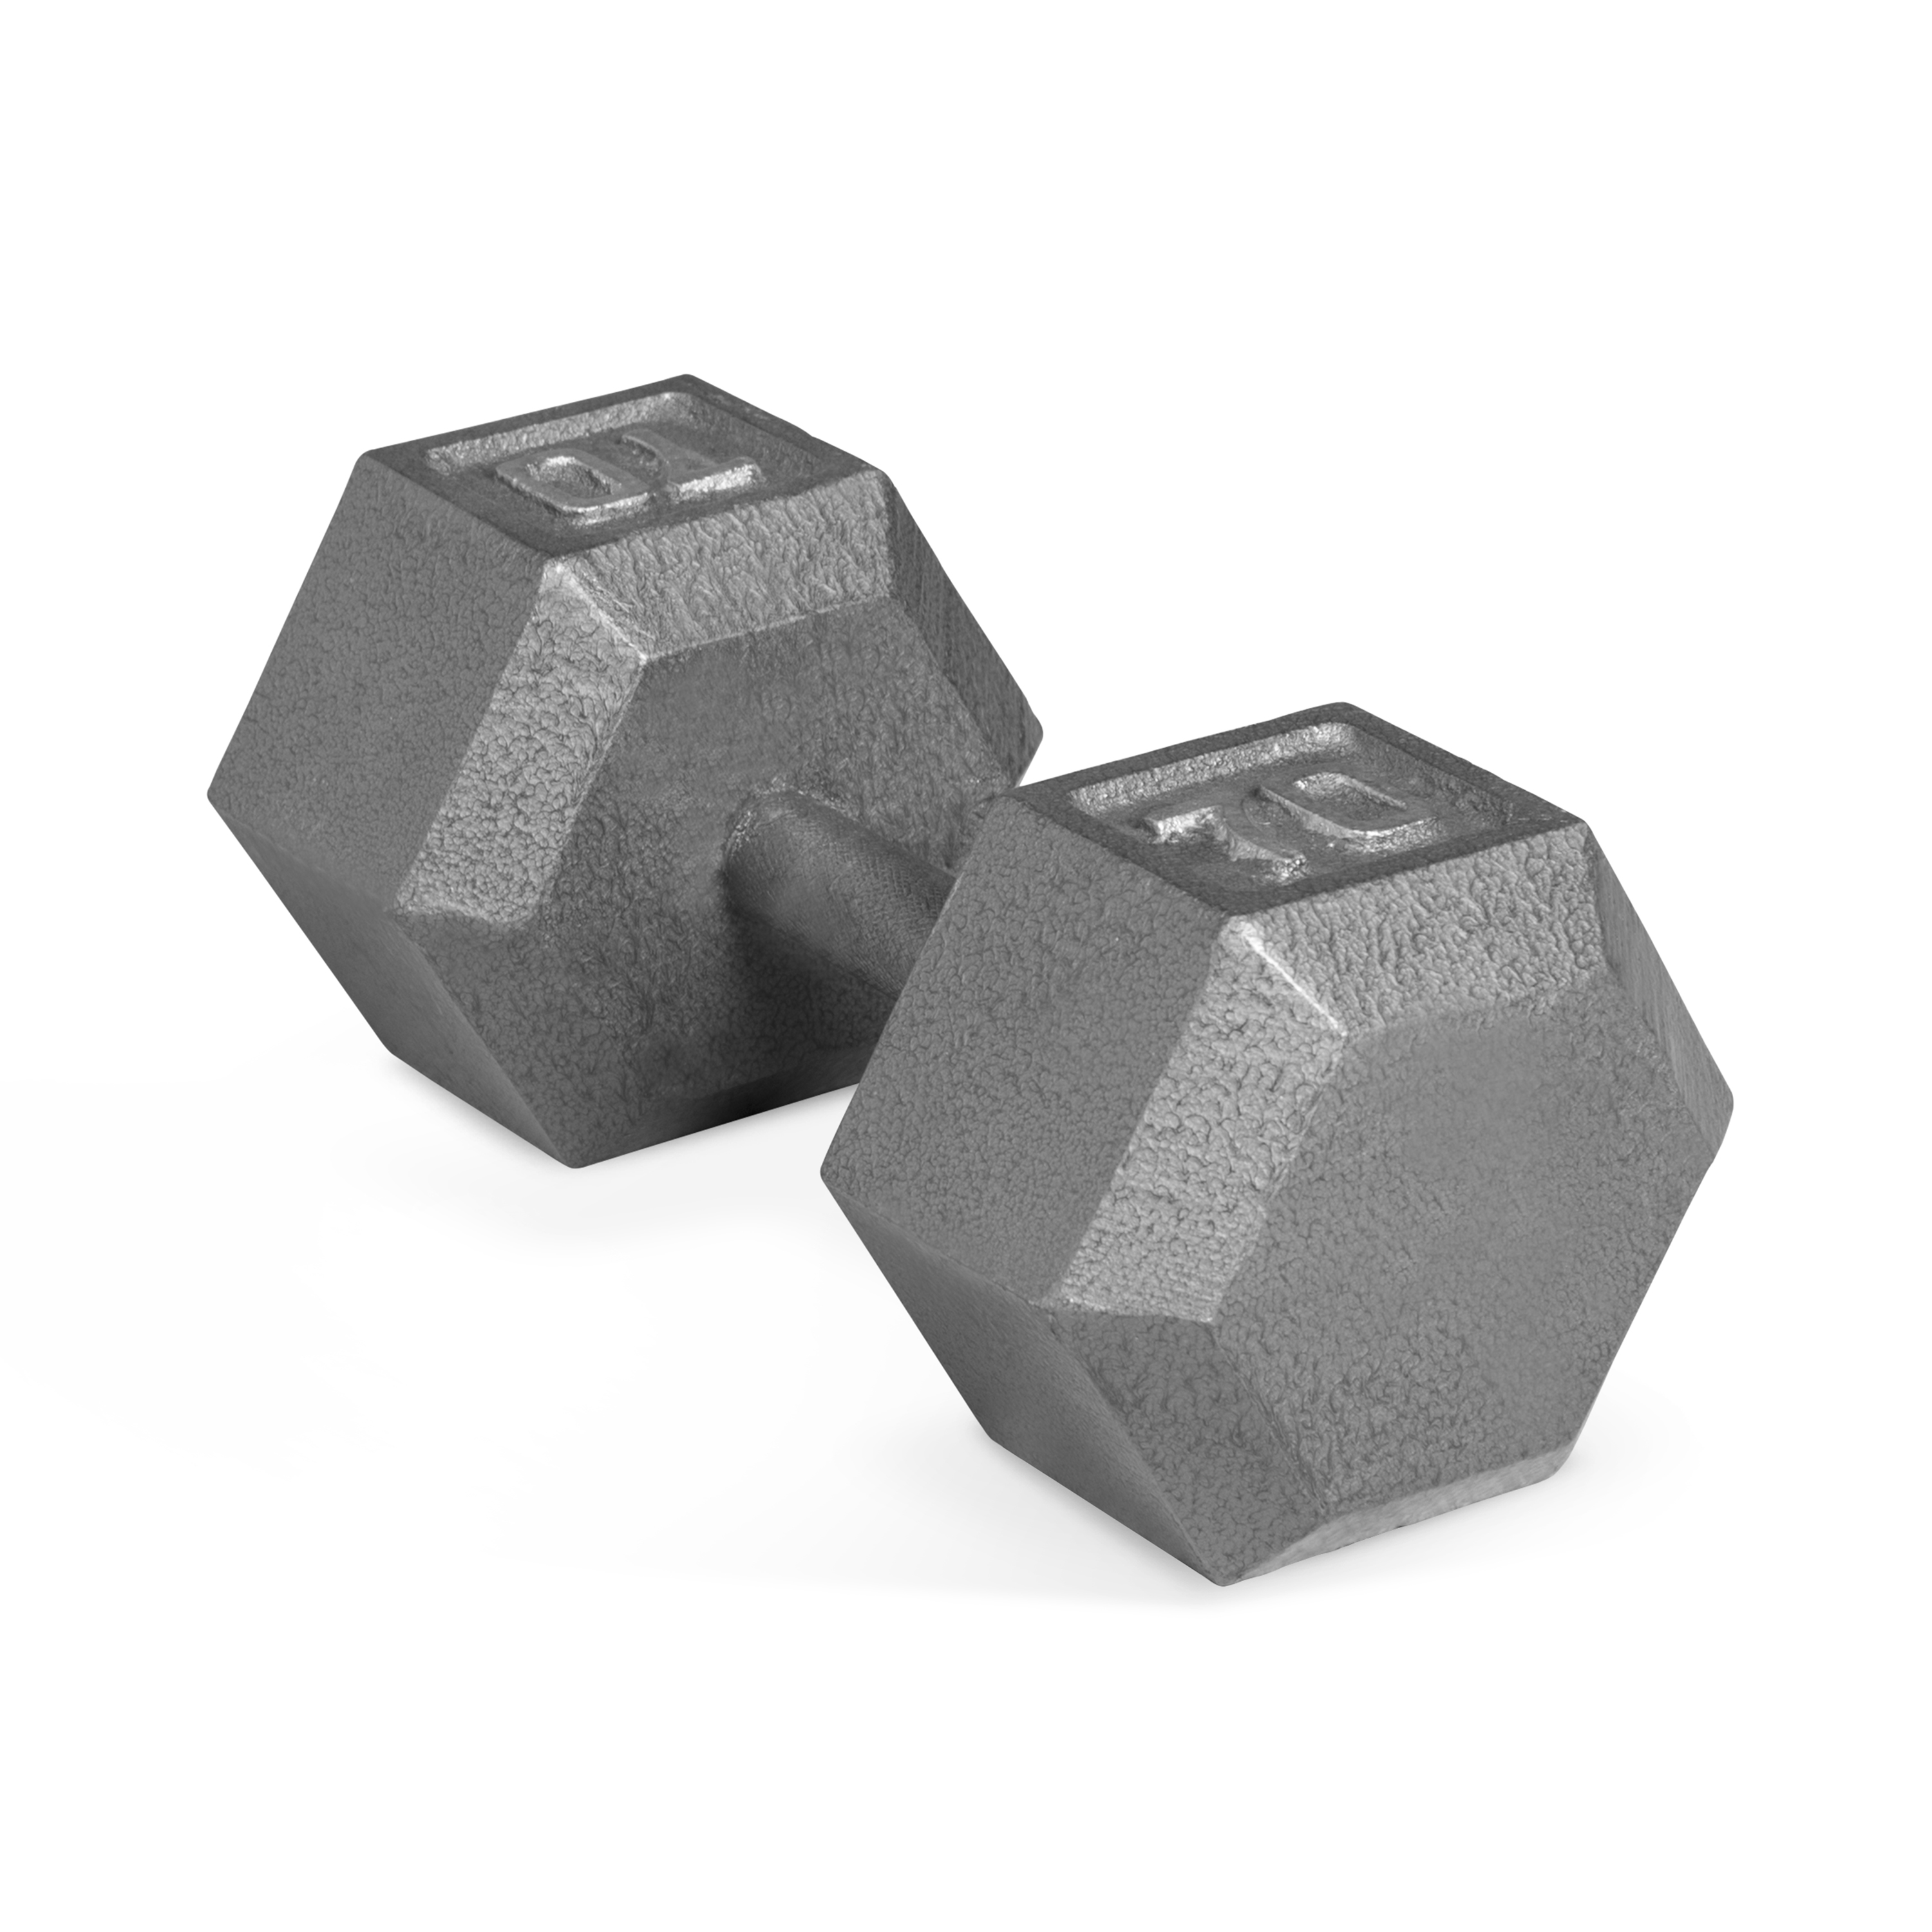 CAP Barbell 70lb Cast Iron Hex Dumbbell, Single - image 1 of 6